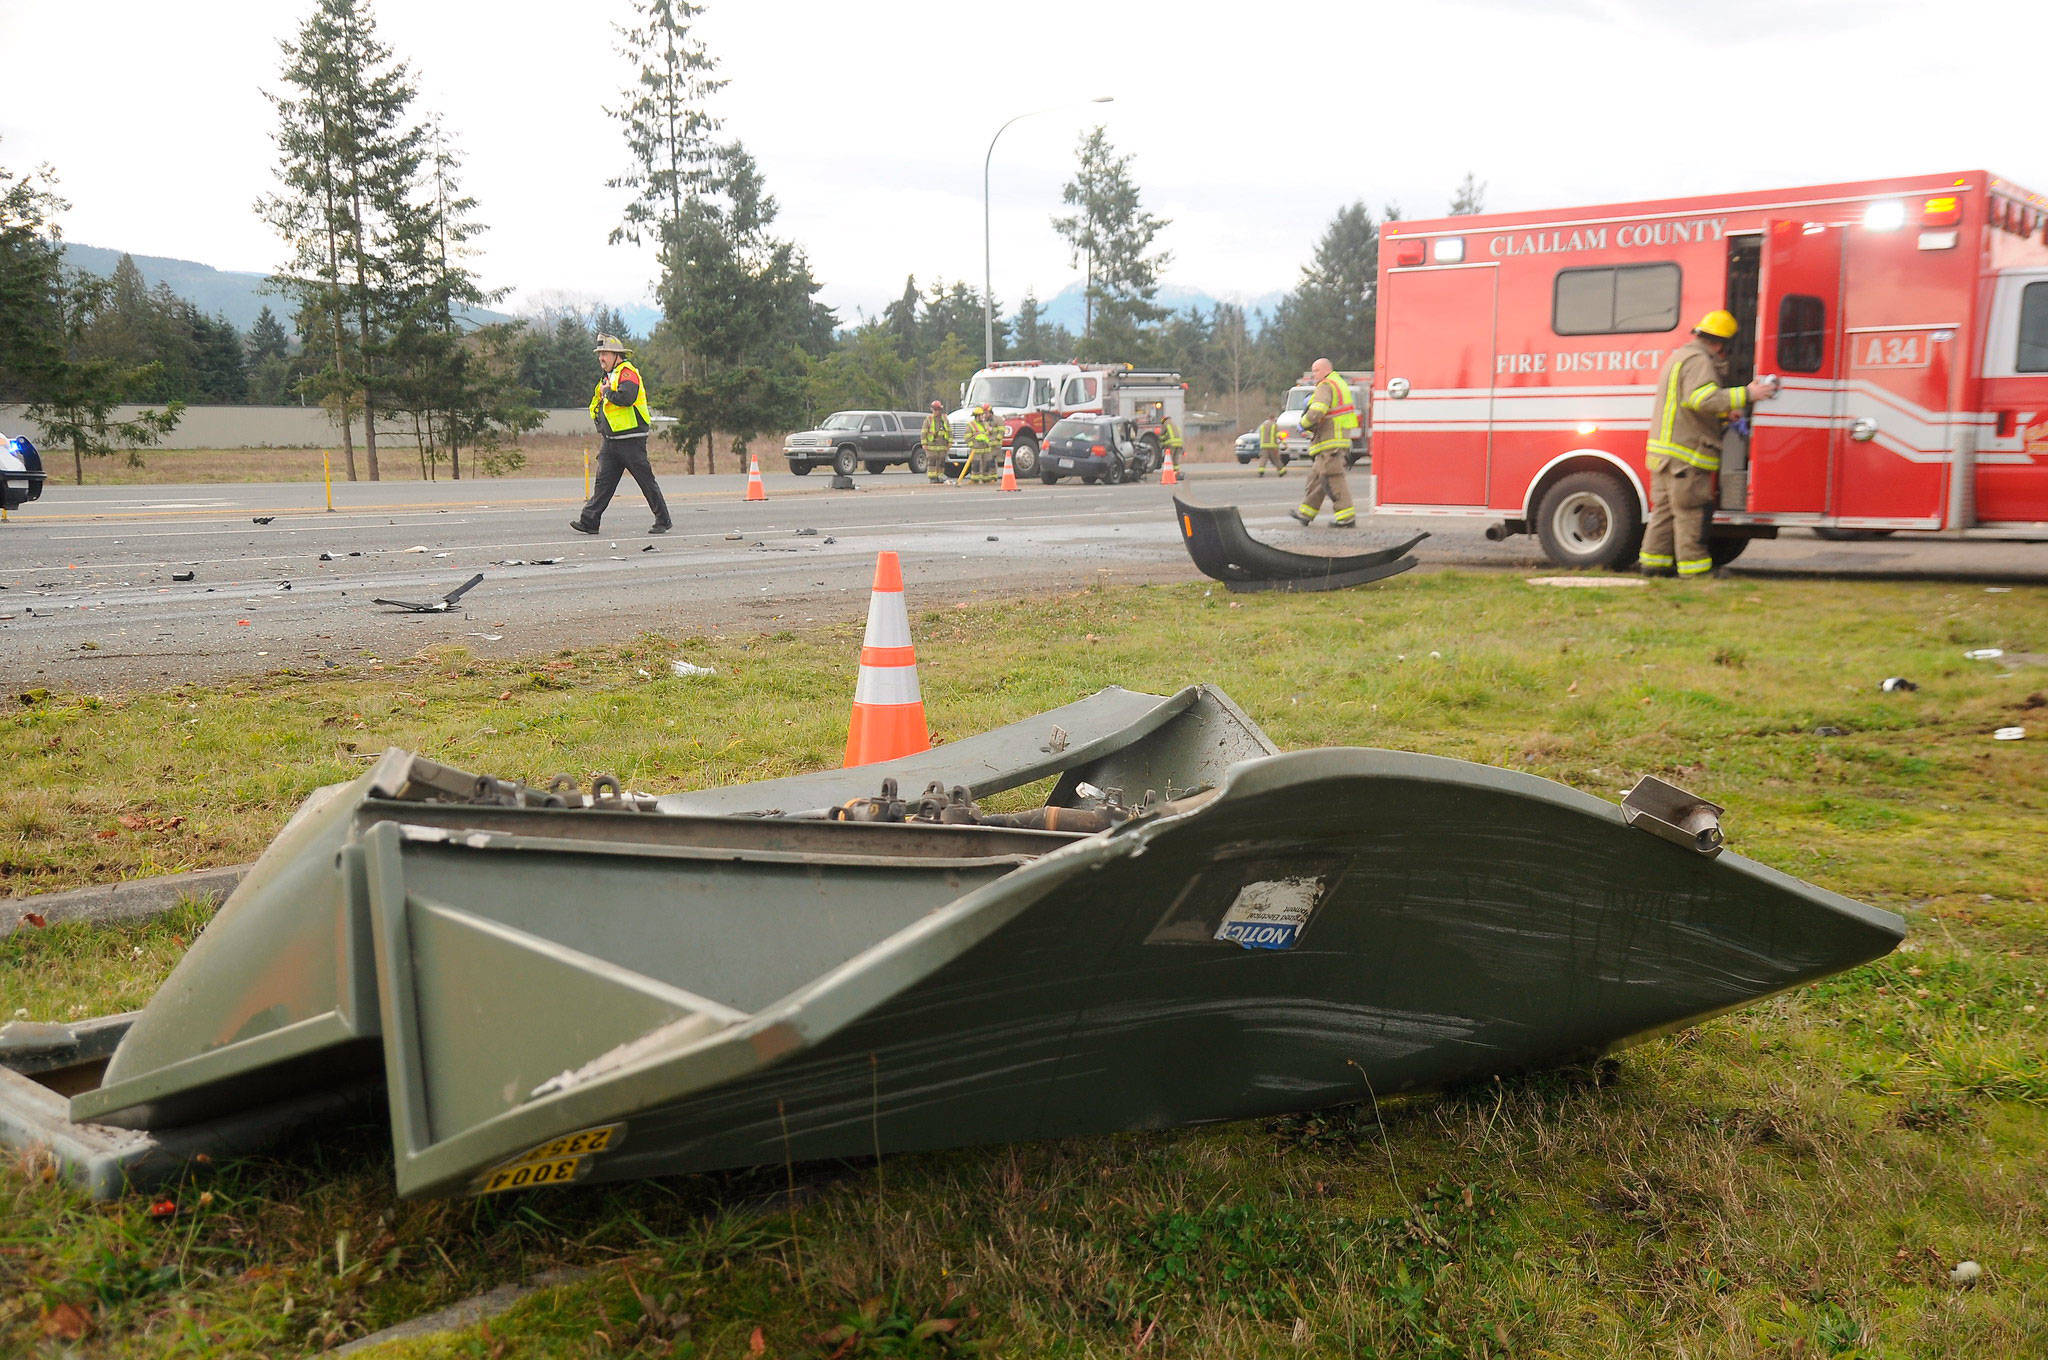 A transformer was destroyed in a wreck on Dec. 3 that sent two Sequim people and a Port Angeles woman to area hospitals. The Sequim driver was driving without insurance and a suspended license. Sequim Gazette photo by Michael Dashiell